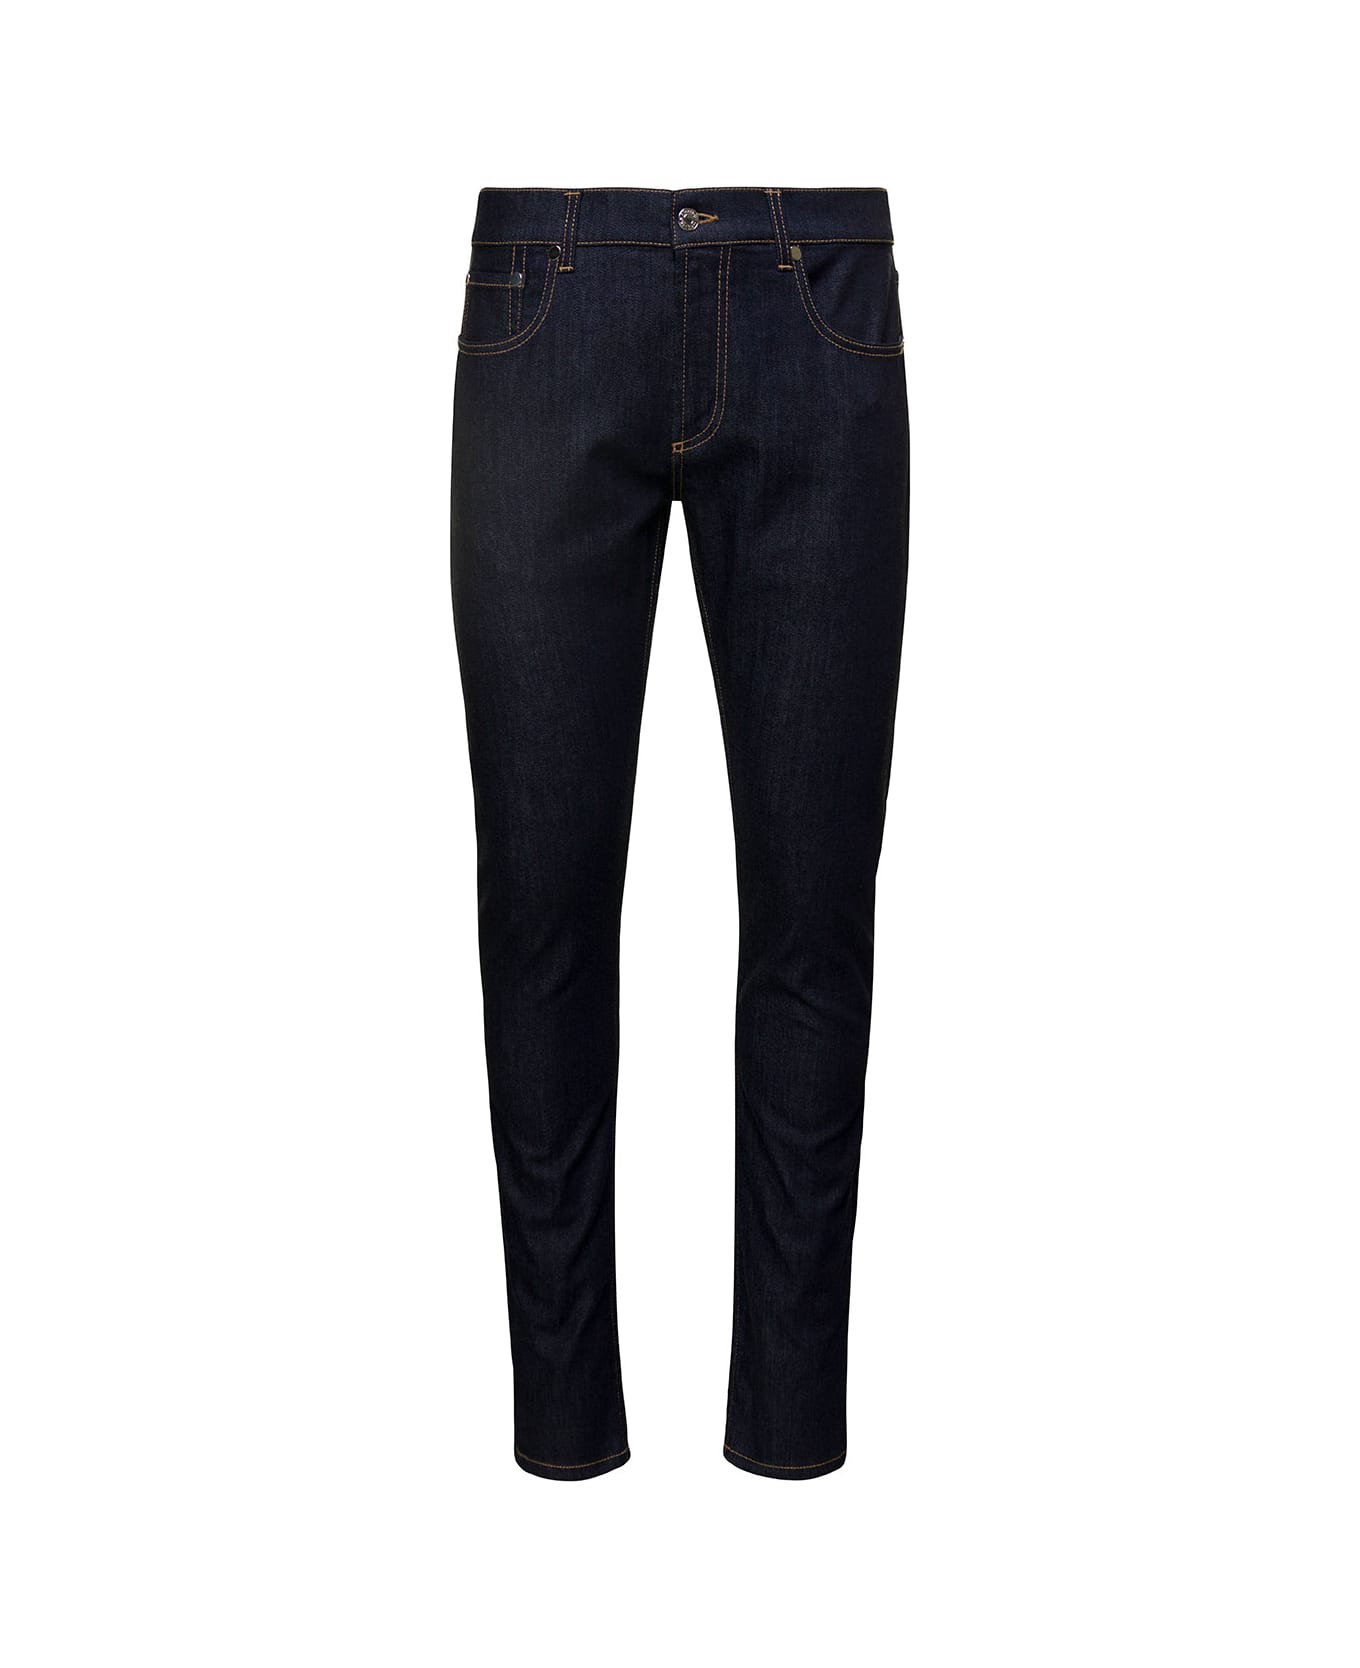 Alexander McQueen Blue Tight Pants With Metallic Piana Patch And Contrasting Stitching In Cotton Denim Man - Blu